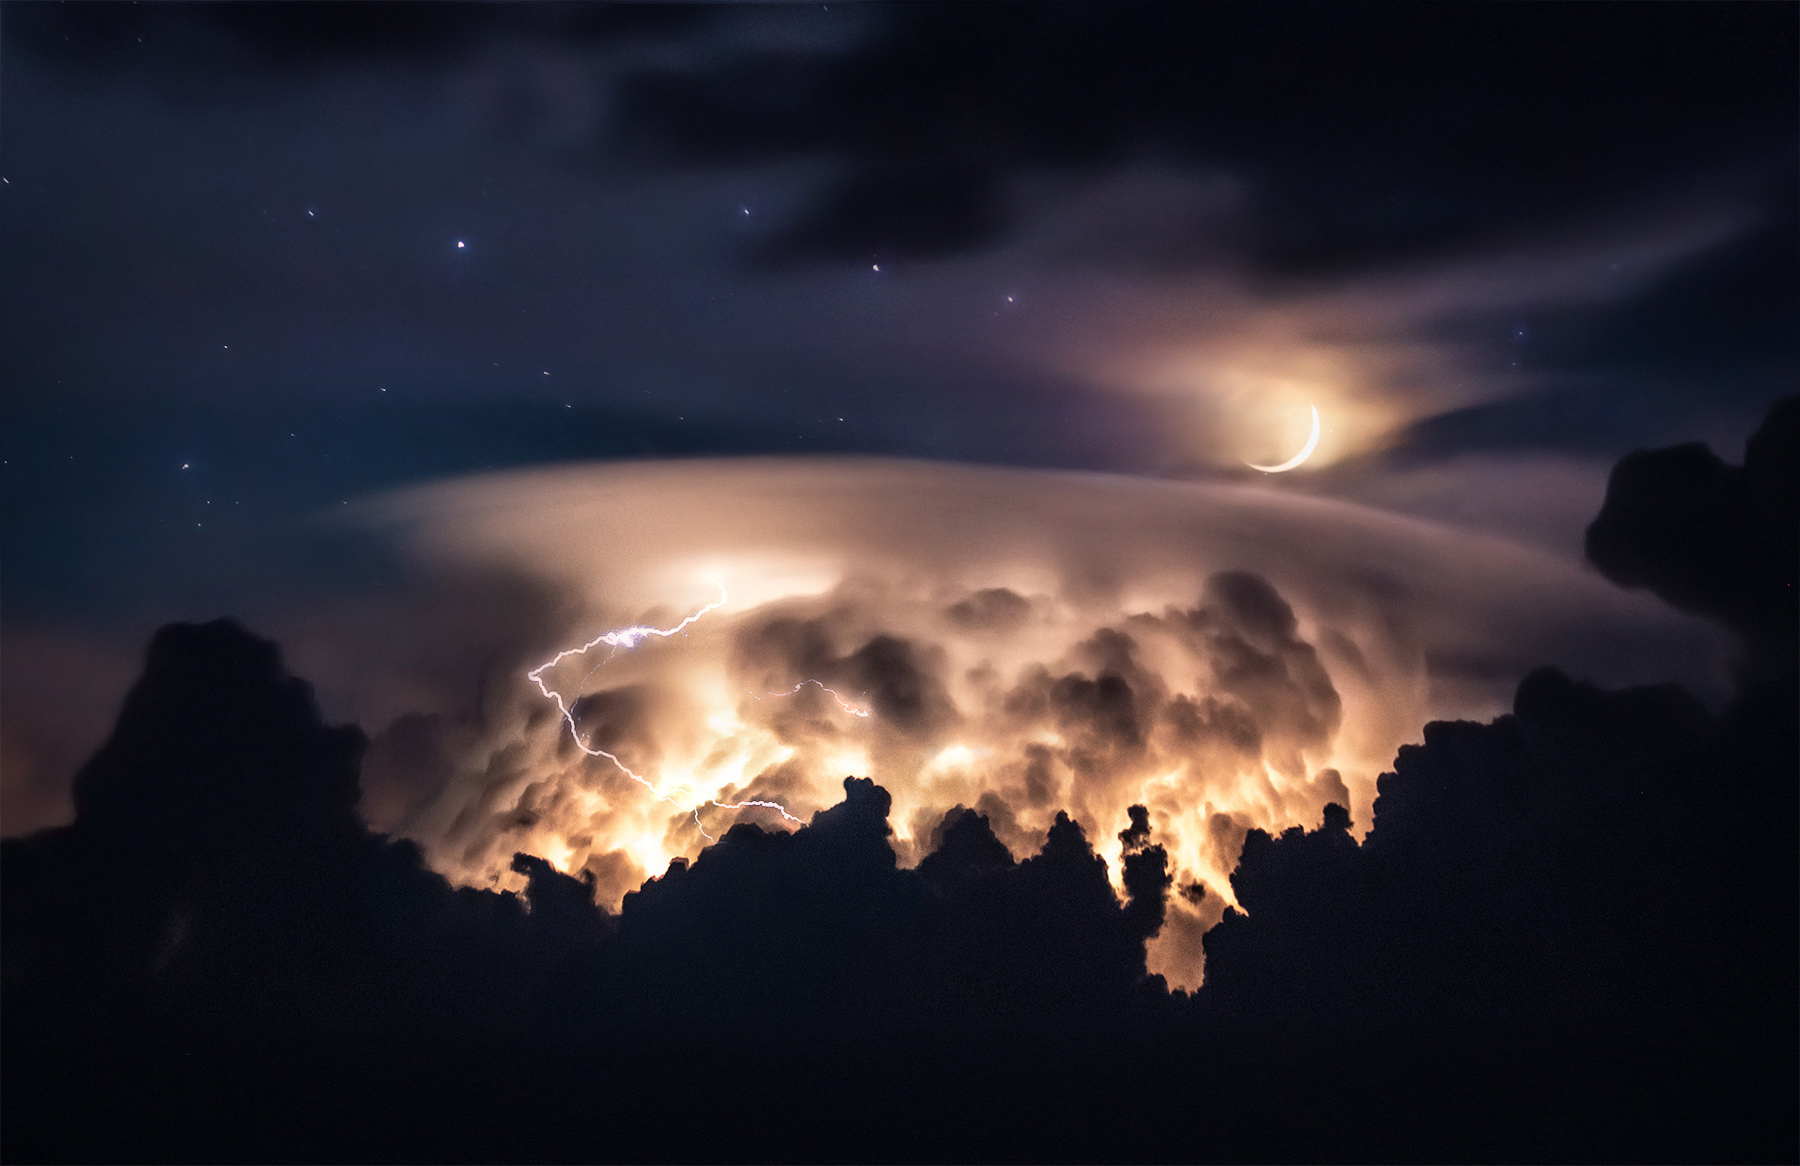 Layers of cloud tops illuminated by lightning next to the setting crescent moon at twilight through a long lens.